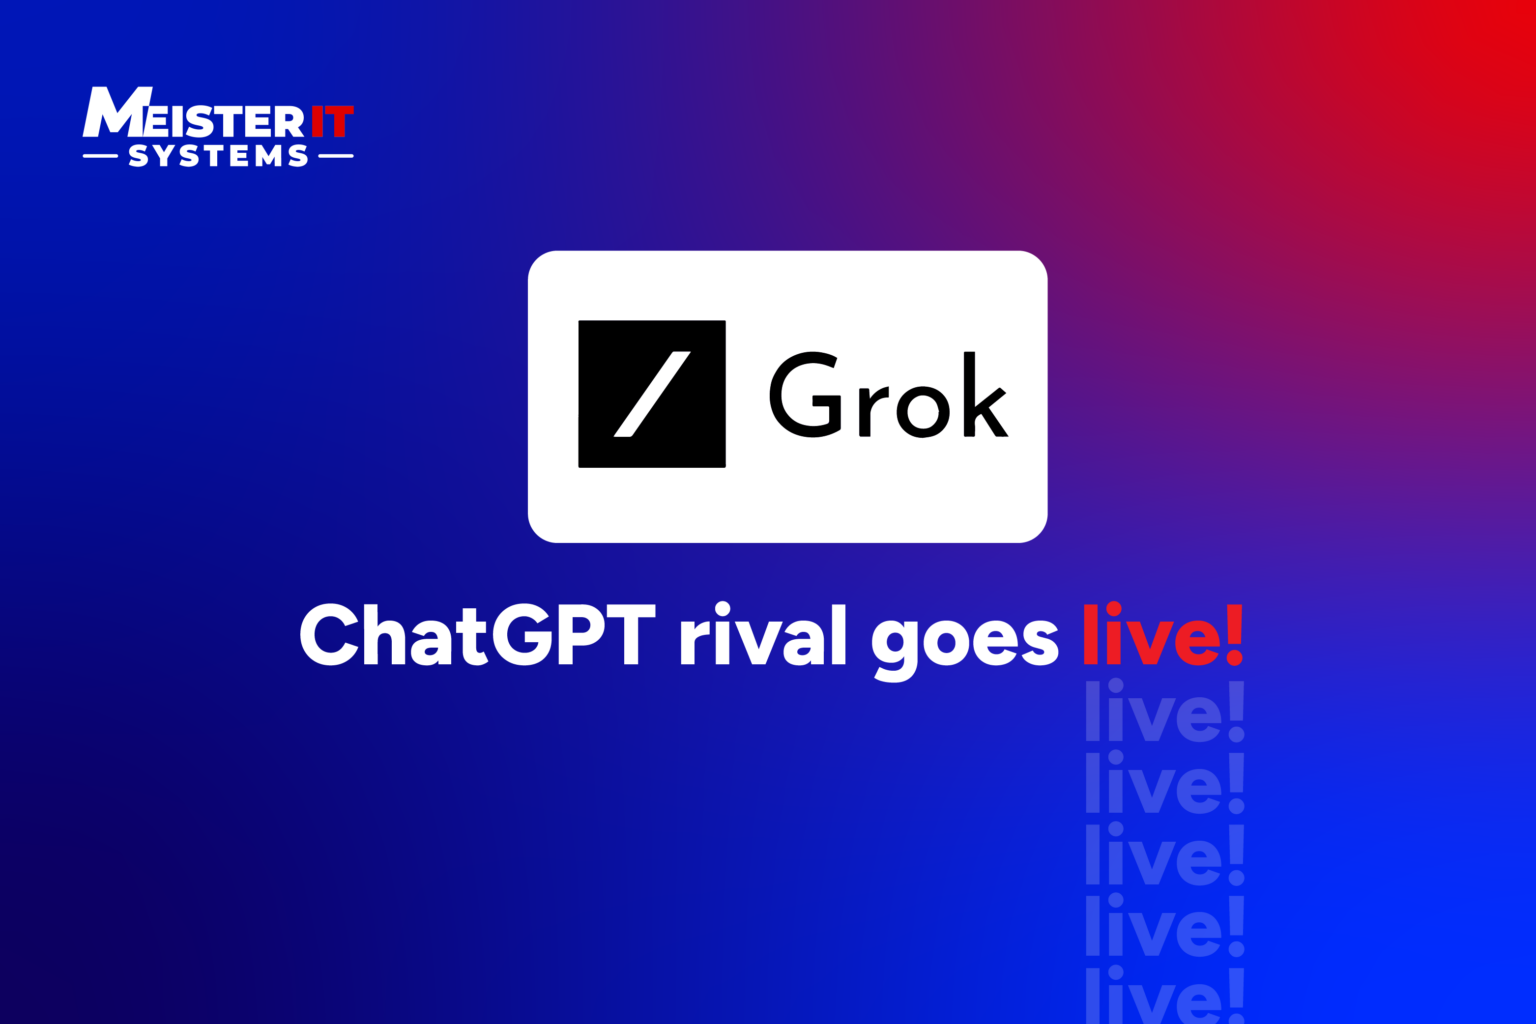 ChatGPT Rival Goes Live!